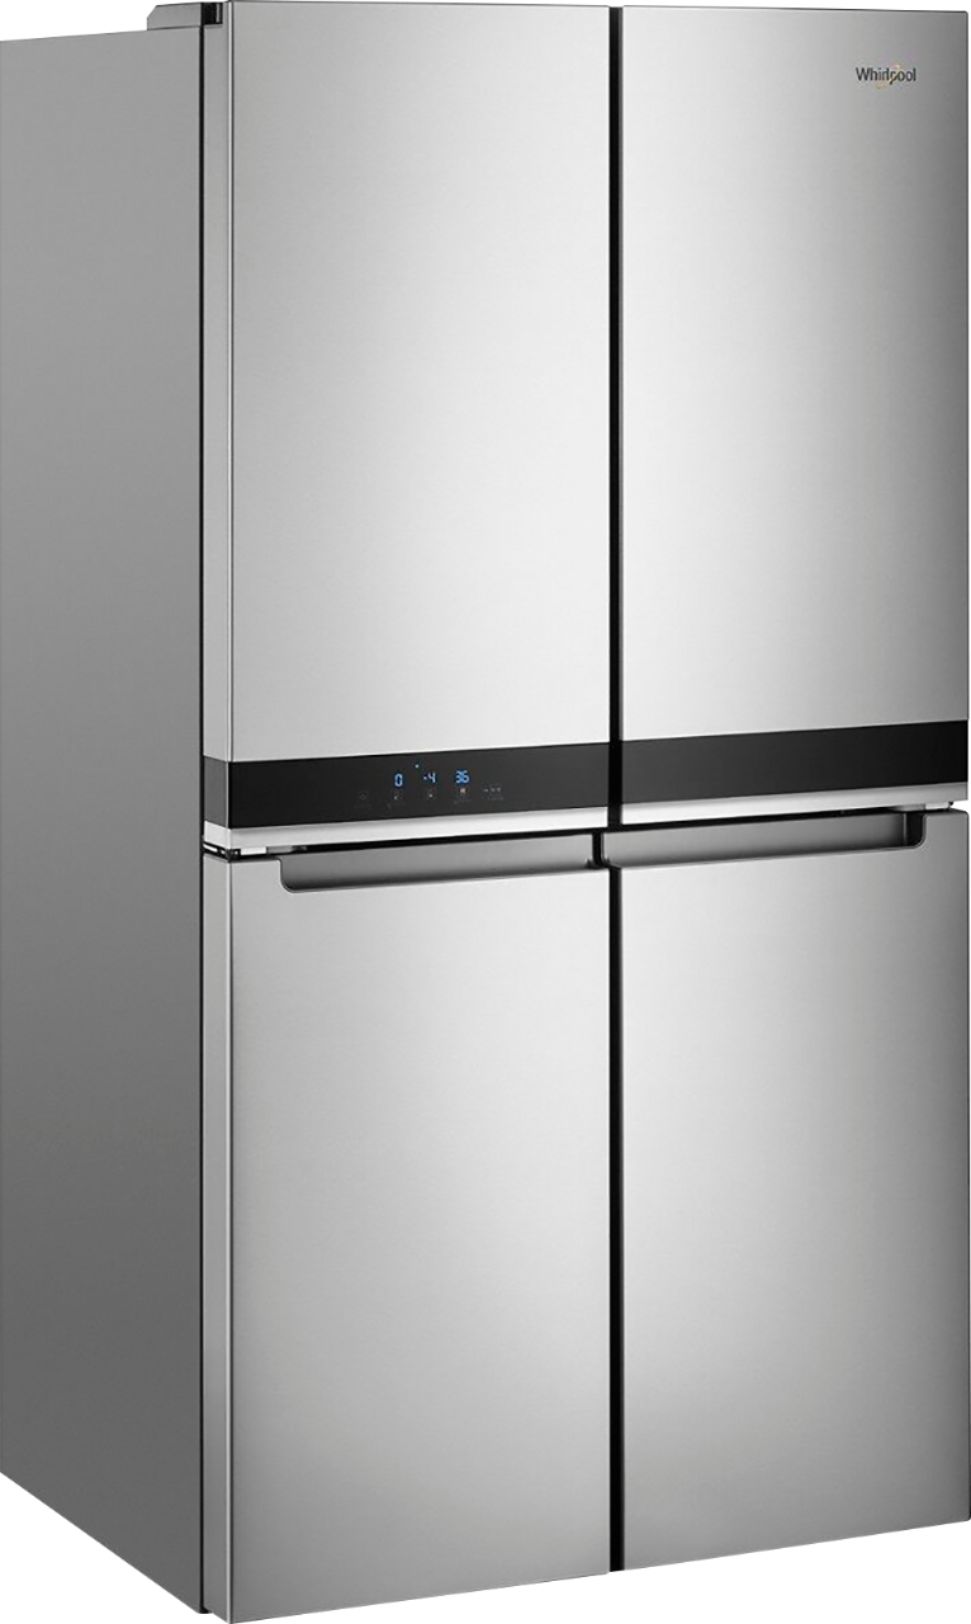 Angle View: Whirlpool - 19.4 Cu. Ft. 4-Door French Door Counter-Depth Refrigerator with Flexible Organization Spaces - Stainless steel